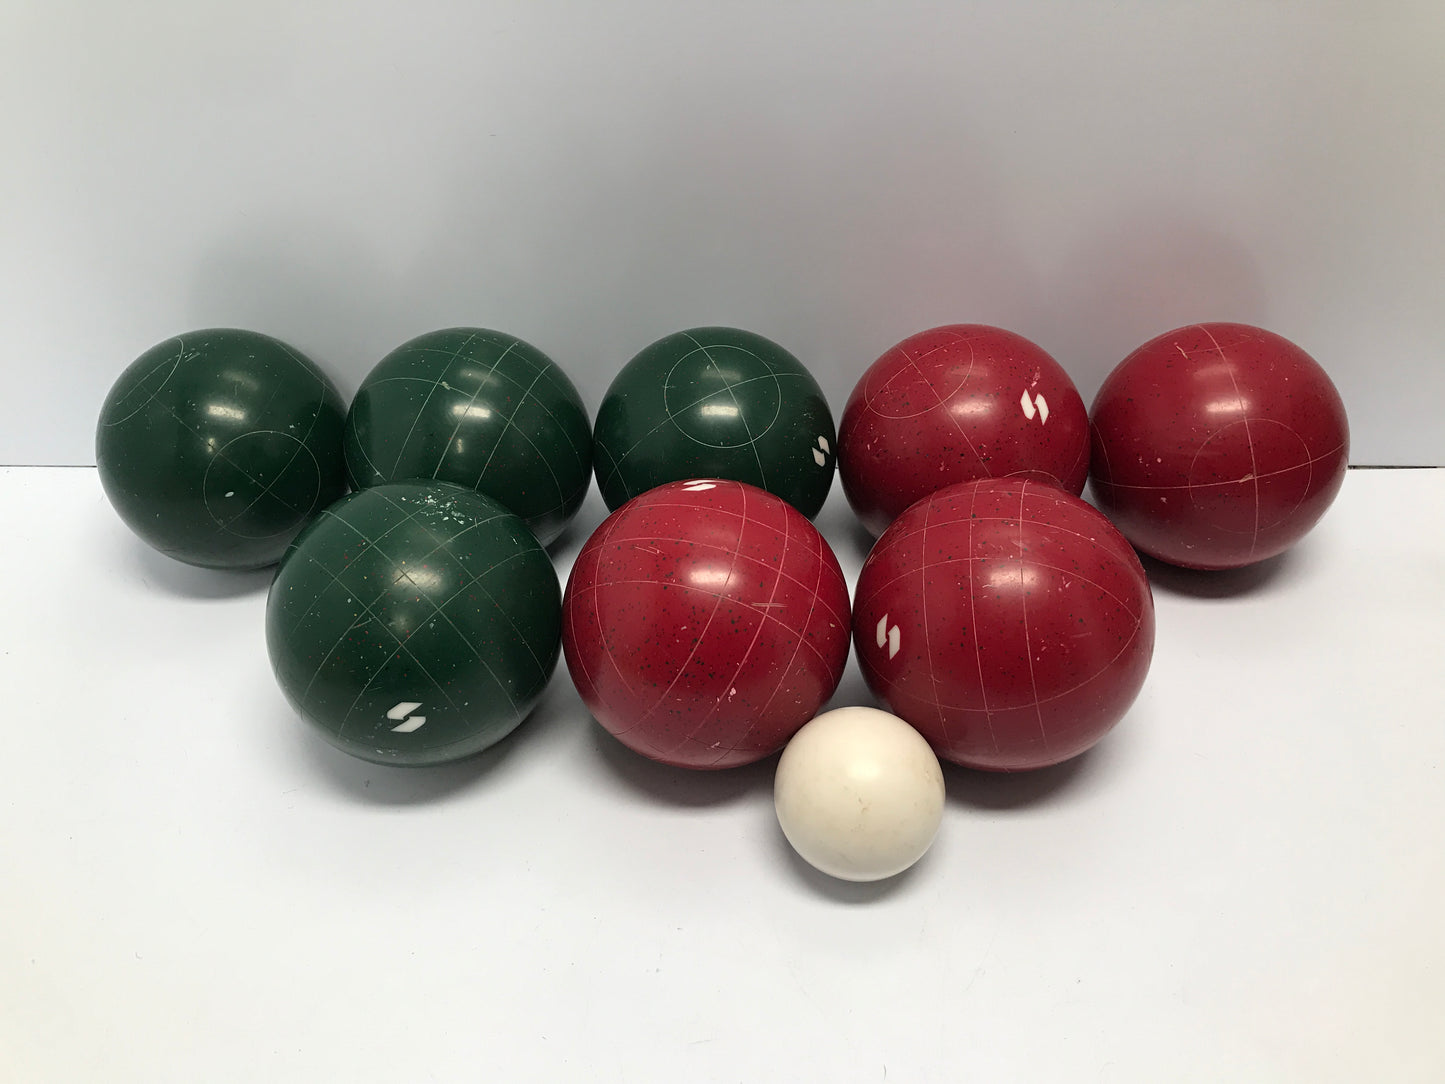 Vintage Sportcraft Bocce Ball Set Green Red Adult Size Carry Bag Original Wood Box Like New Rope Handles Rare Set